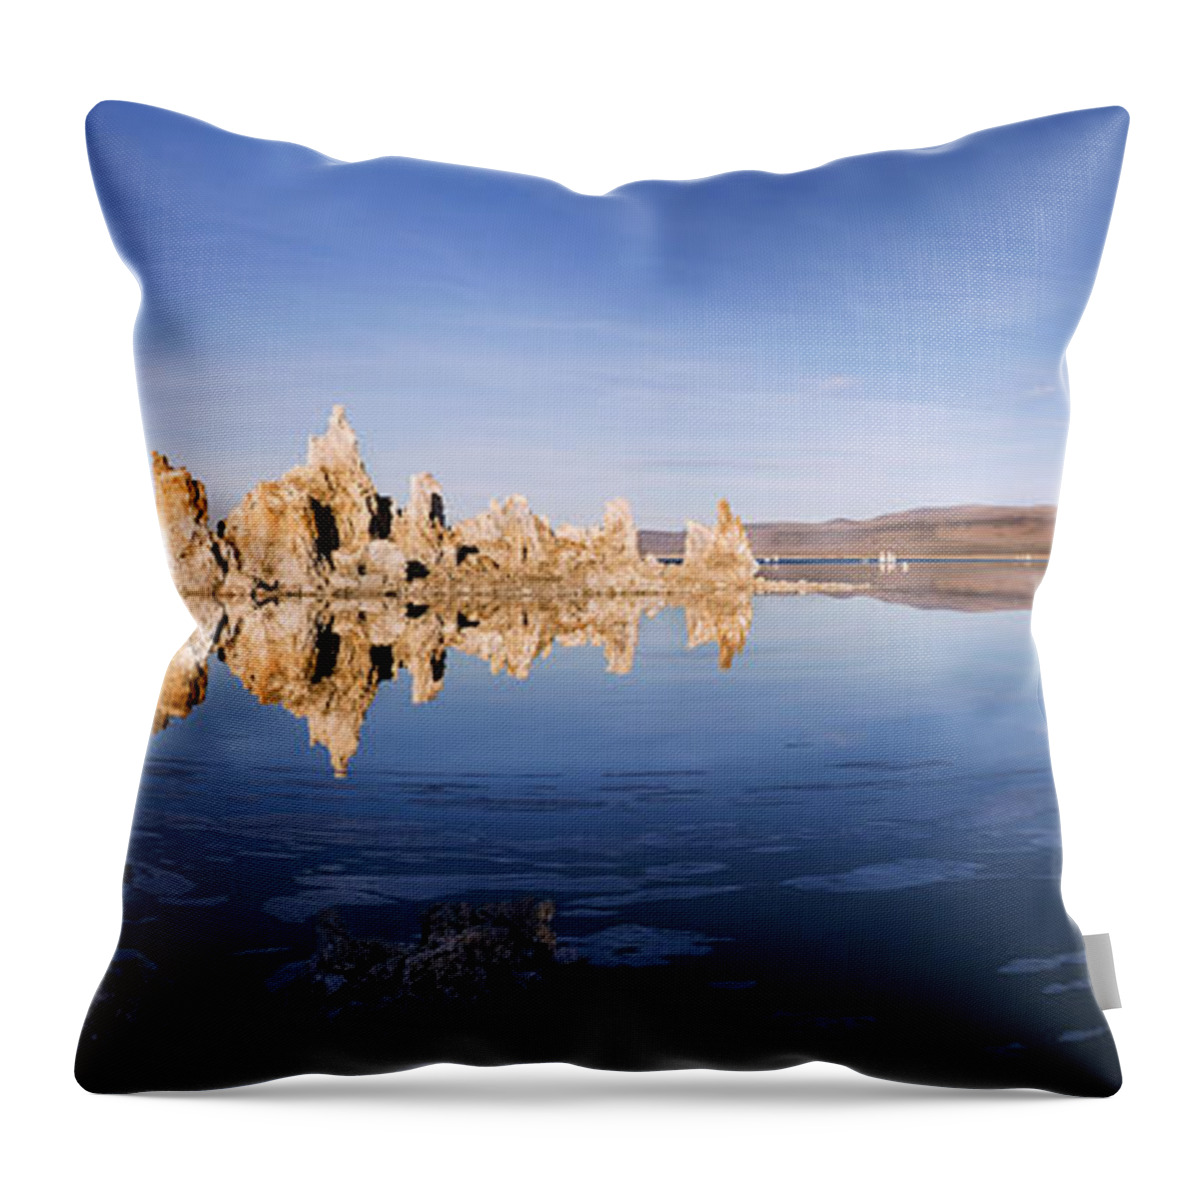 Abstract Throw Pillow featuring the photograph Brutally Calm by Denise Dube